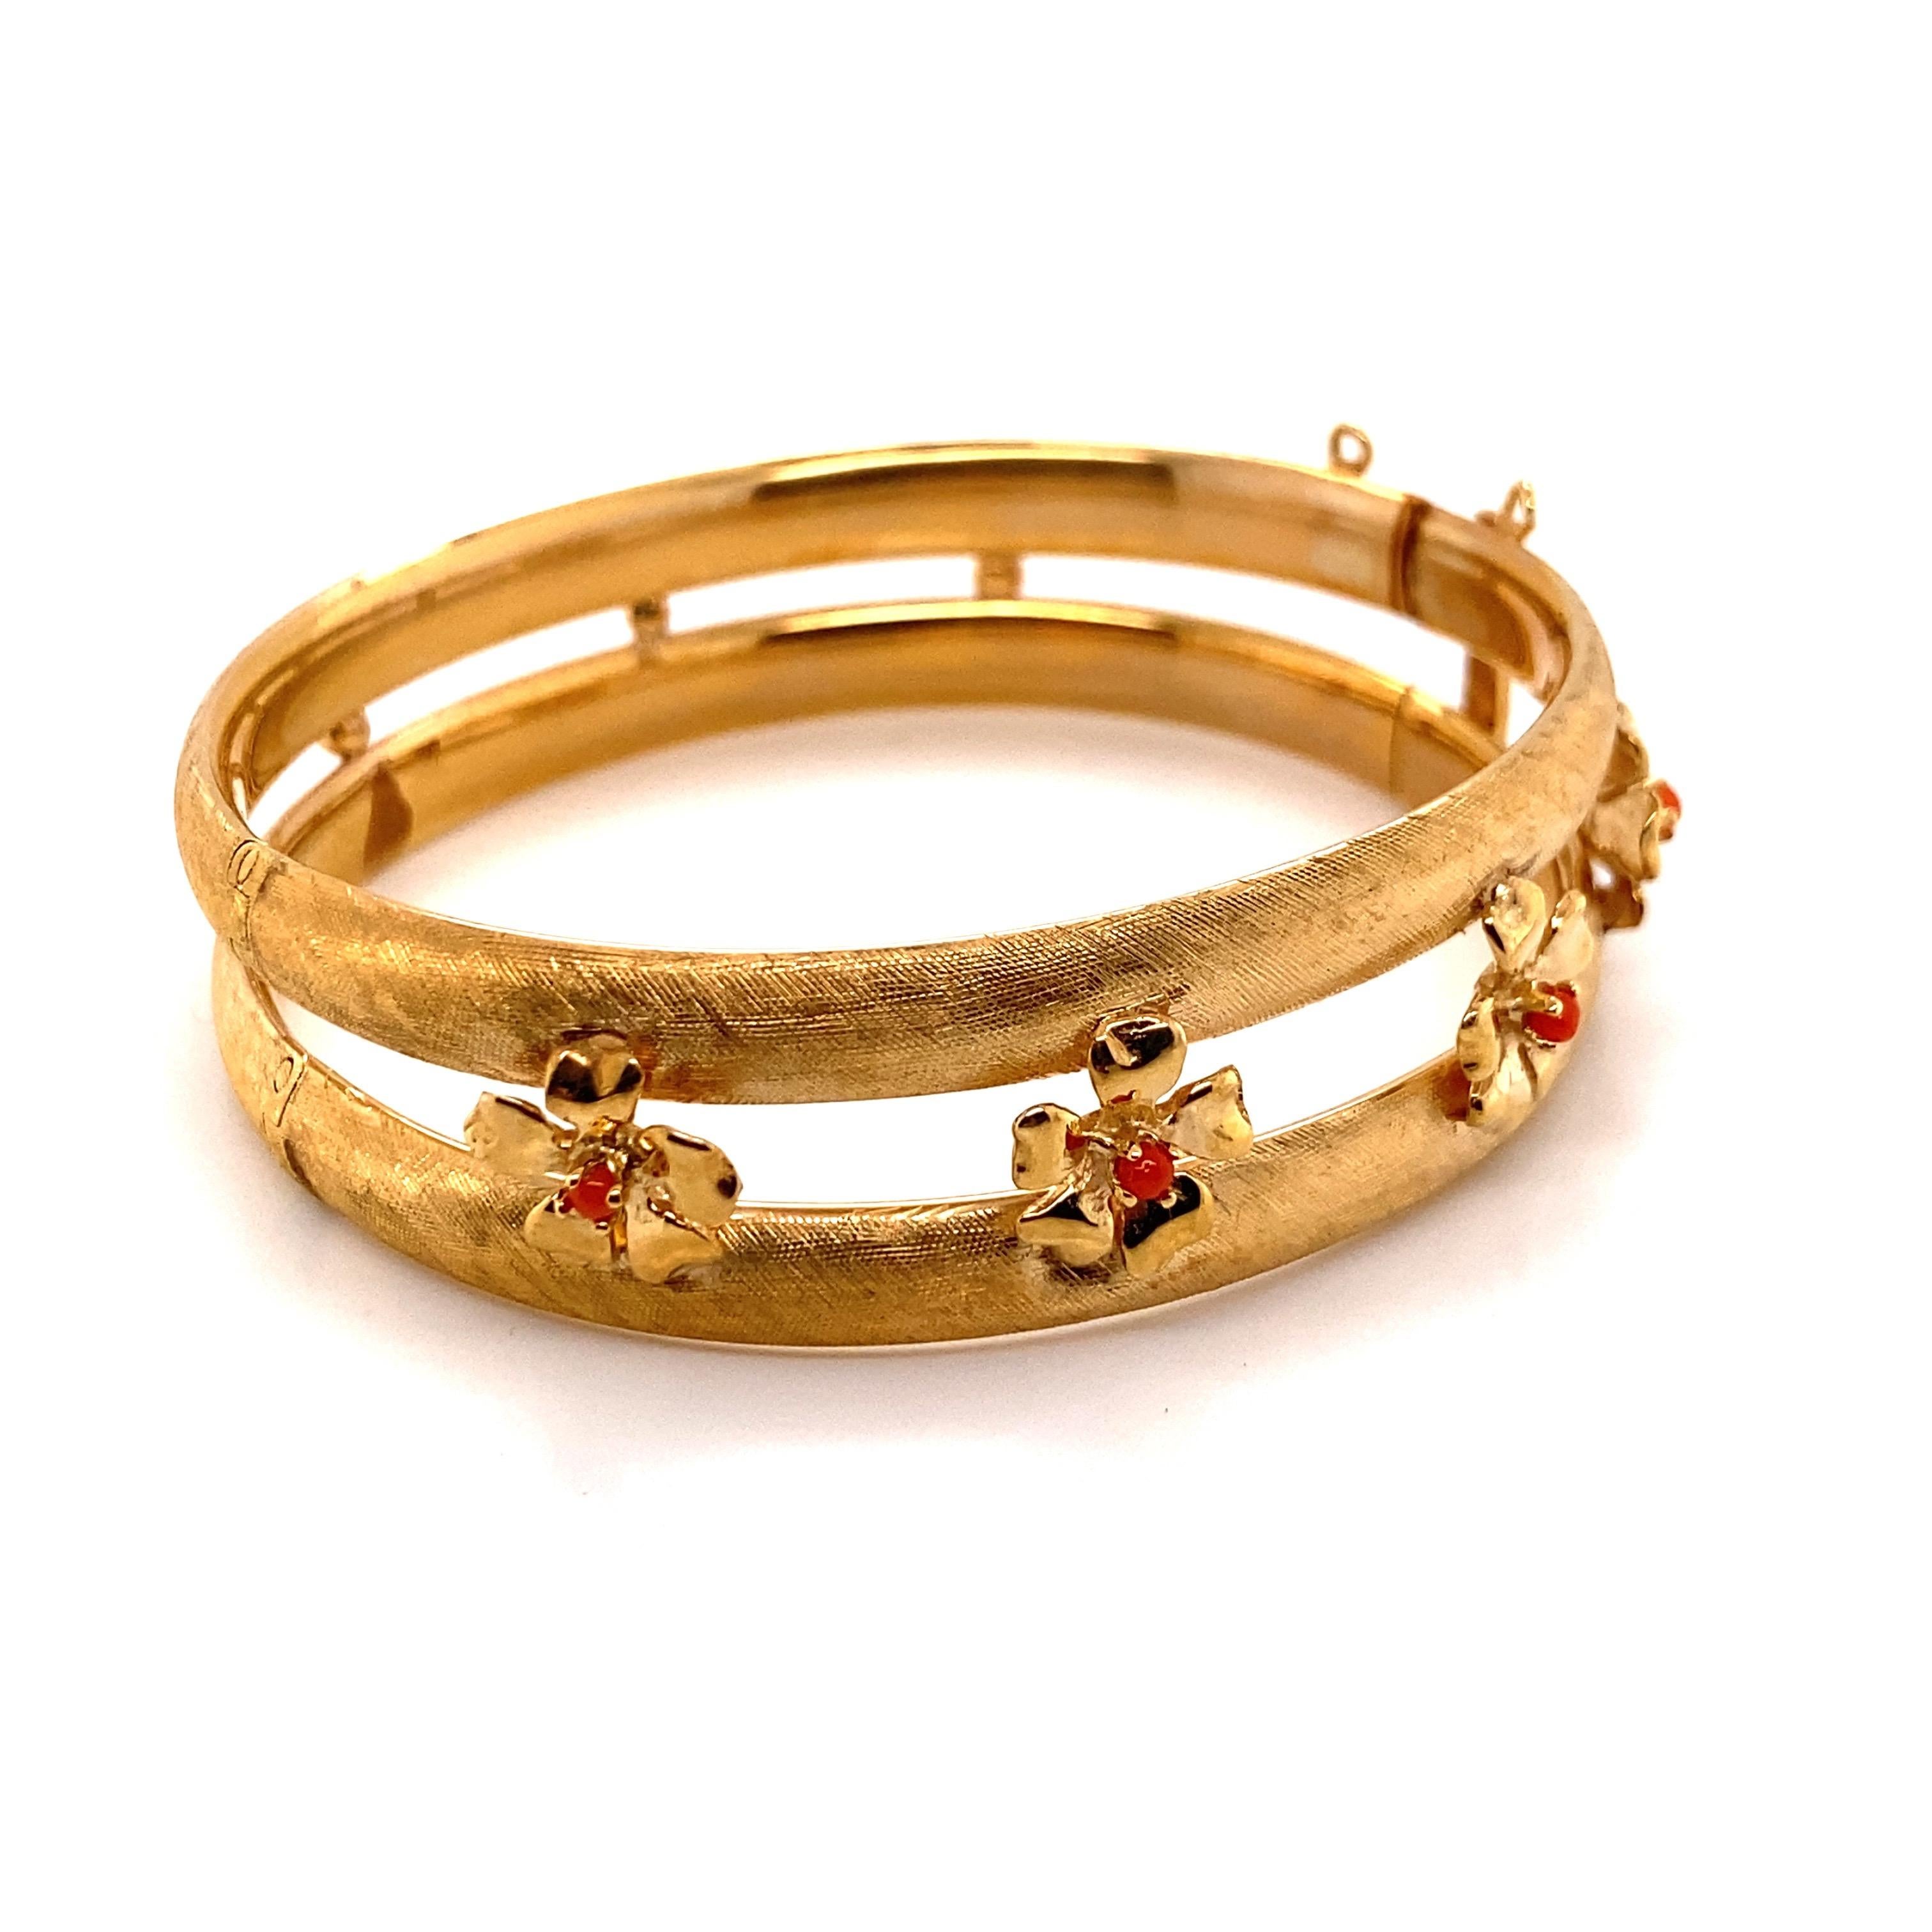 Bead Vintage 14K Yellow Gold Bangle Bracelet with Coral Flower Designs For Sale